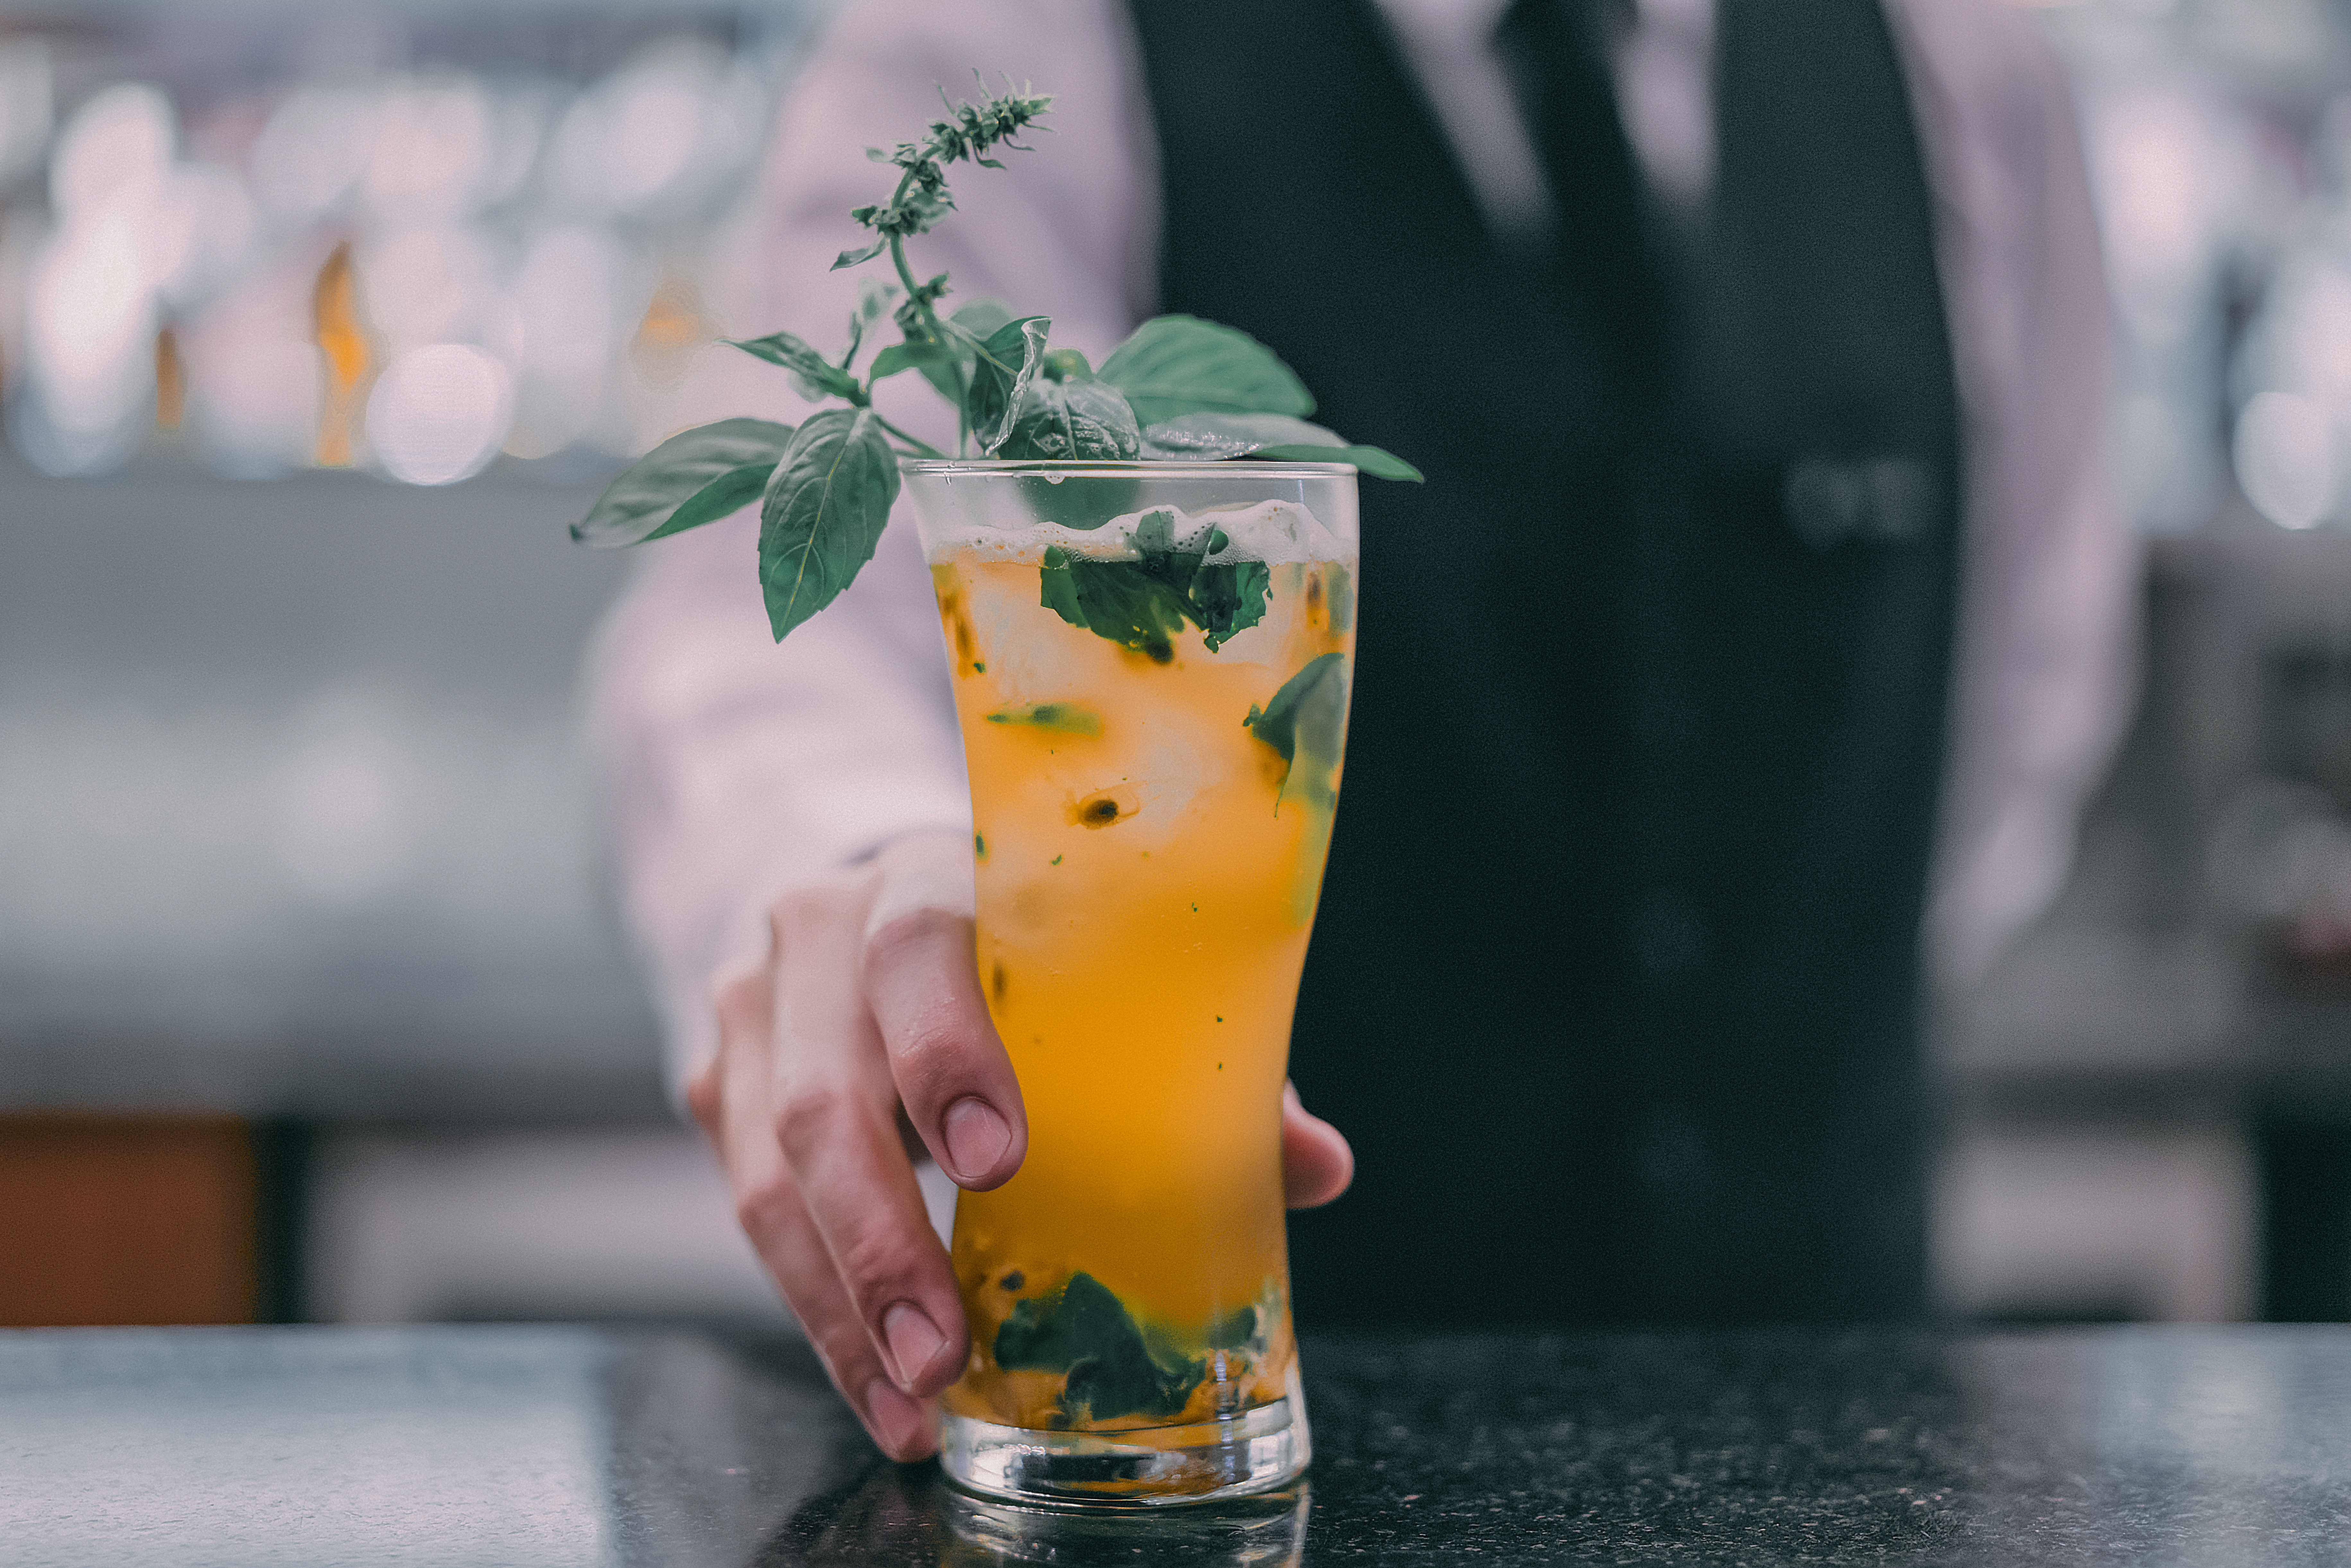 Pullman Bar in Hanoi showcased mixologist Chien’s ‘Emotions’, heavy on the leaves and the flavour